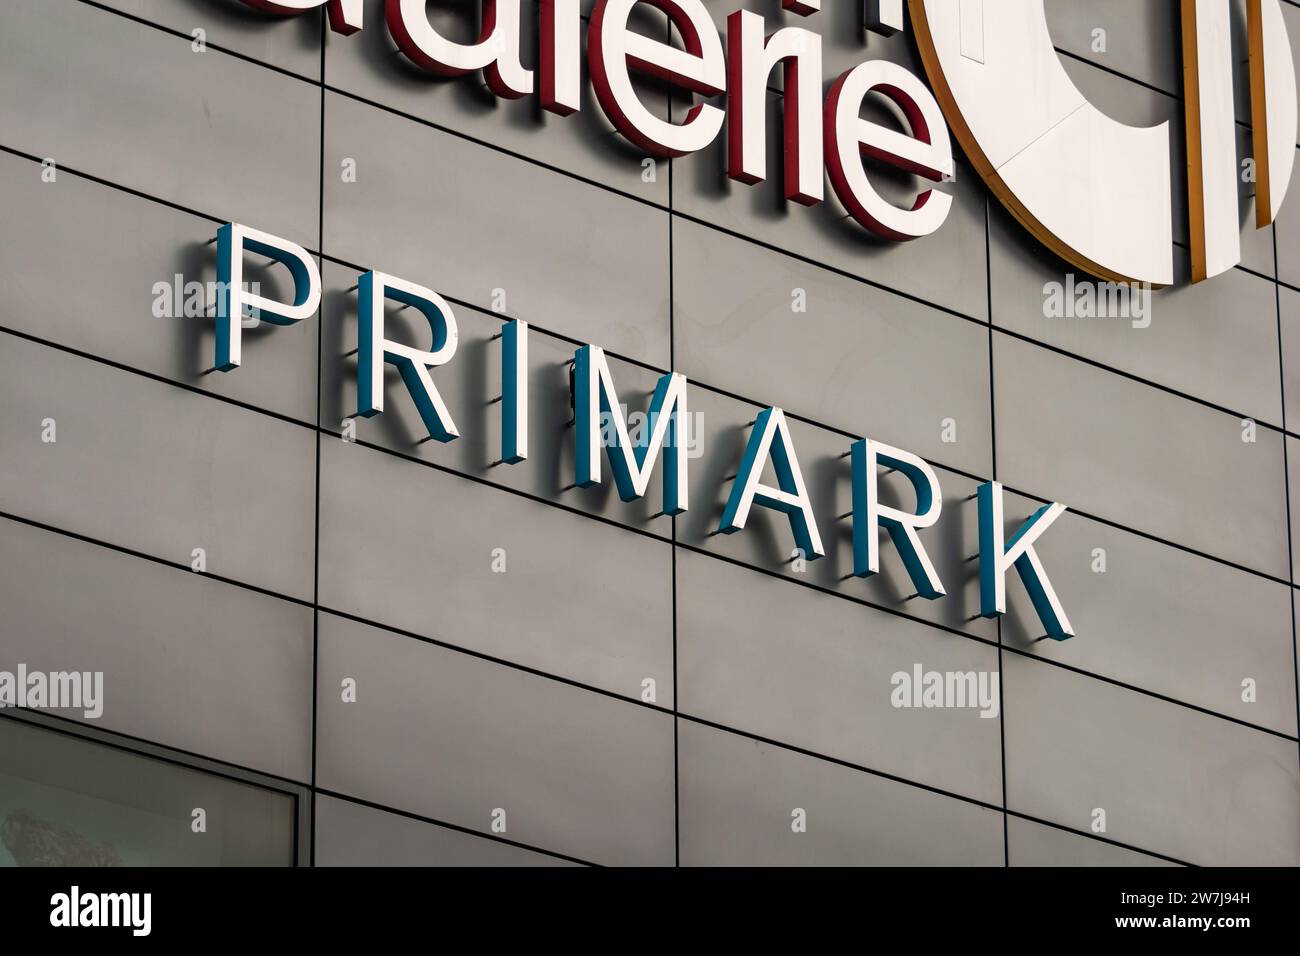 Primark logo sign of the fast fashion company. The retailer of clothes and accessories is located in a shopping mall. Advertisement on the building. Stock Photo